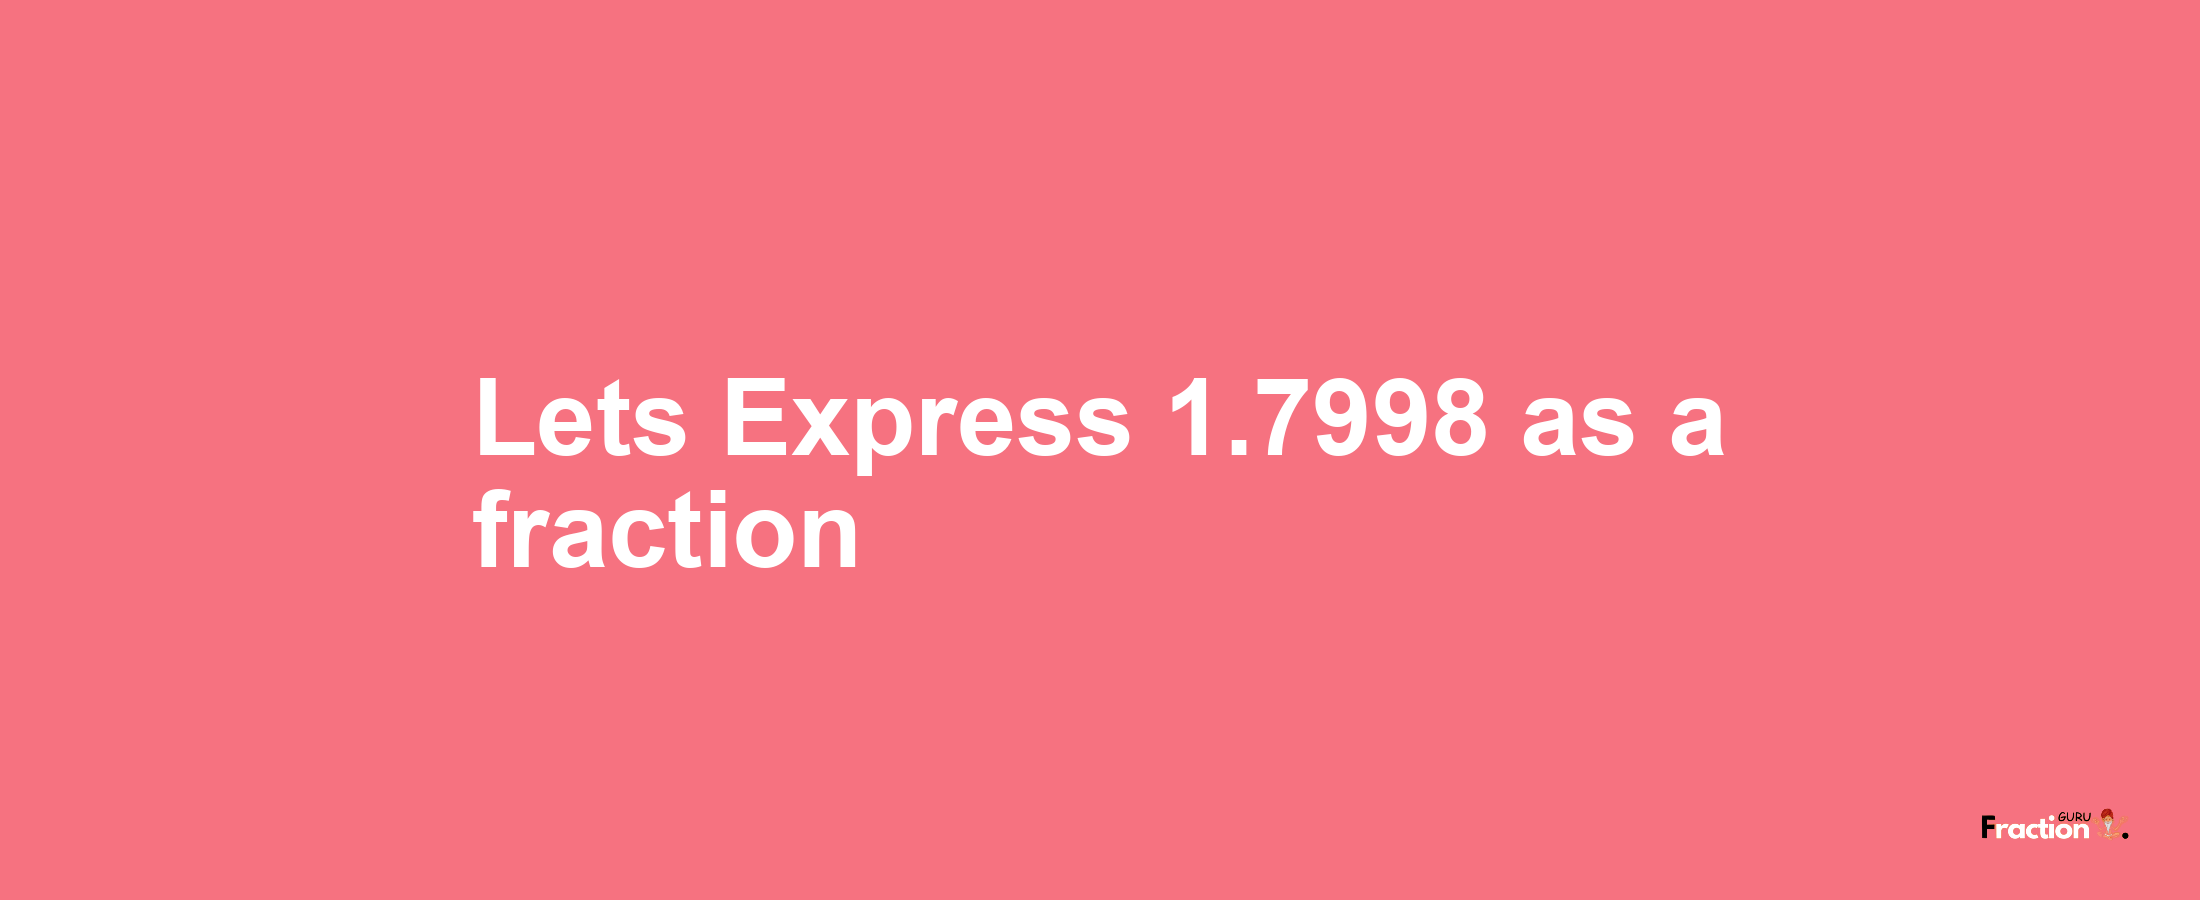 Lets Express 1.7998 as afraction